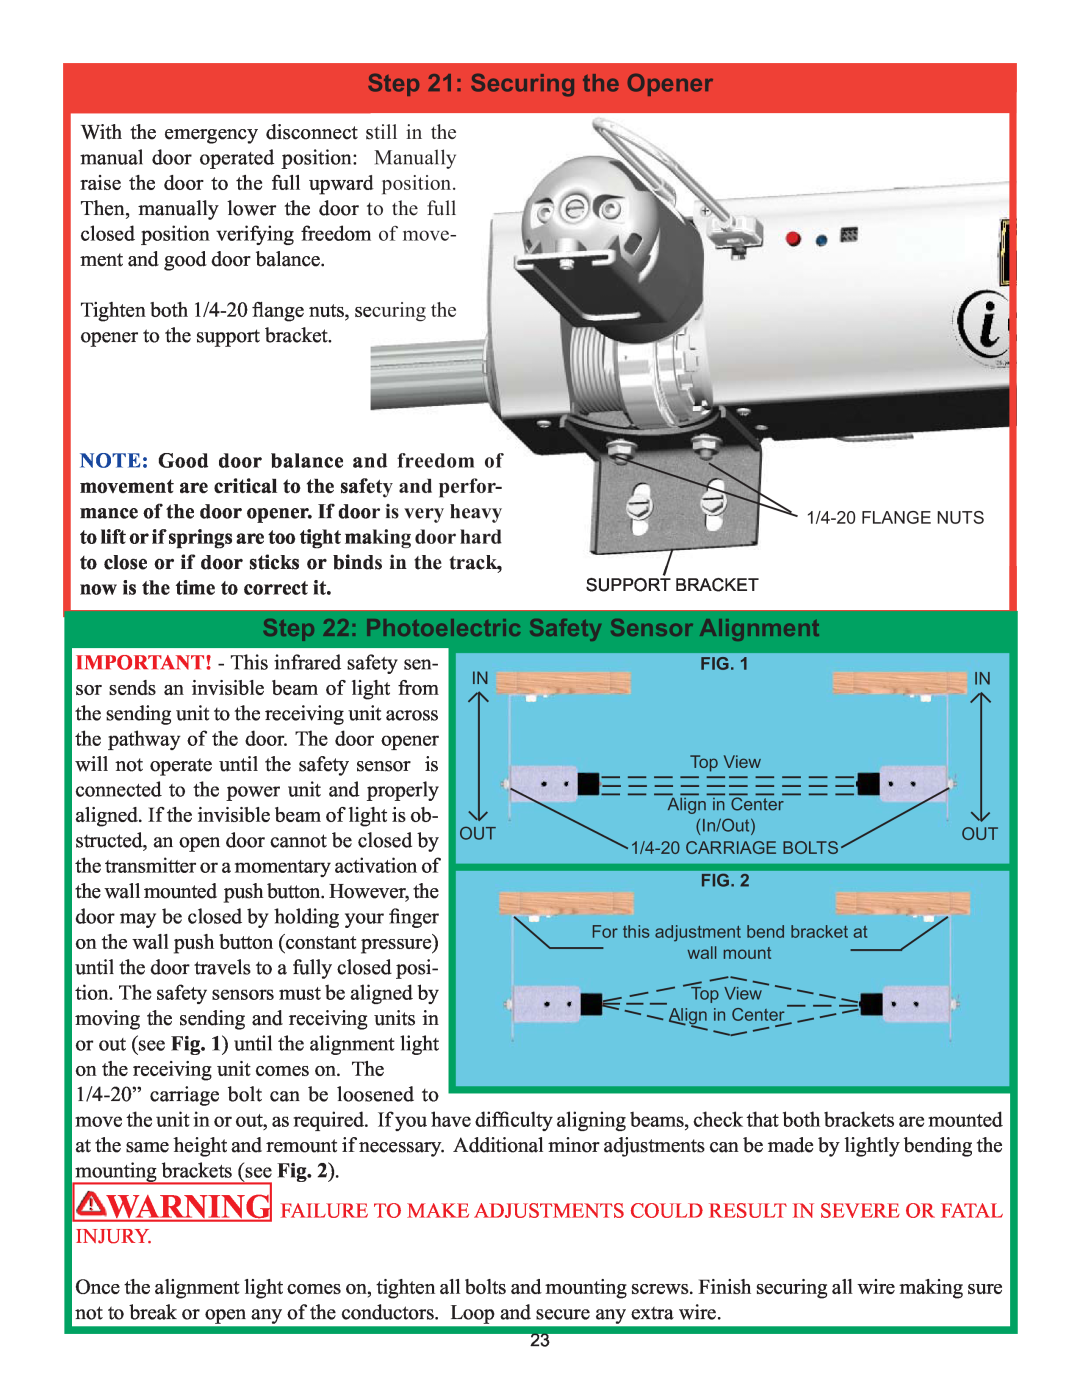 Wayne-Dalton 3982 installation instructions Securing the Opener, Photoelectric Safety Sensor Alignment 